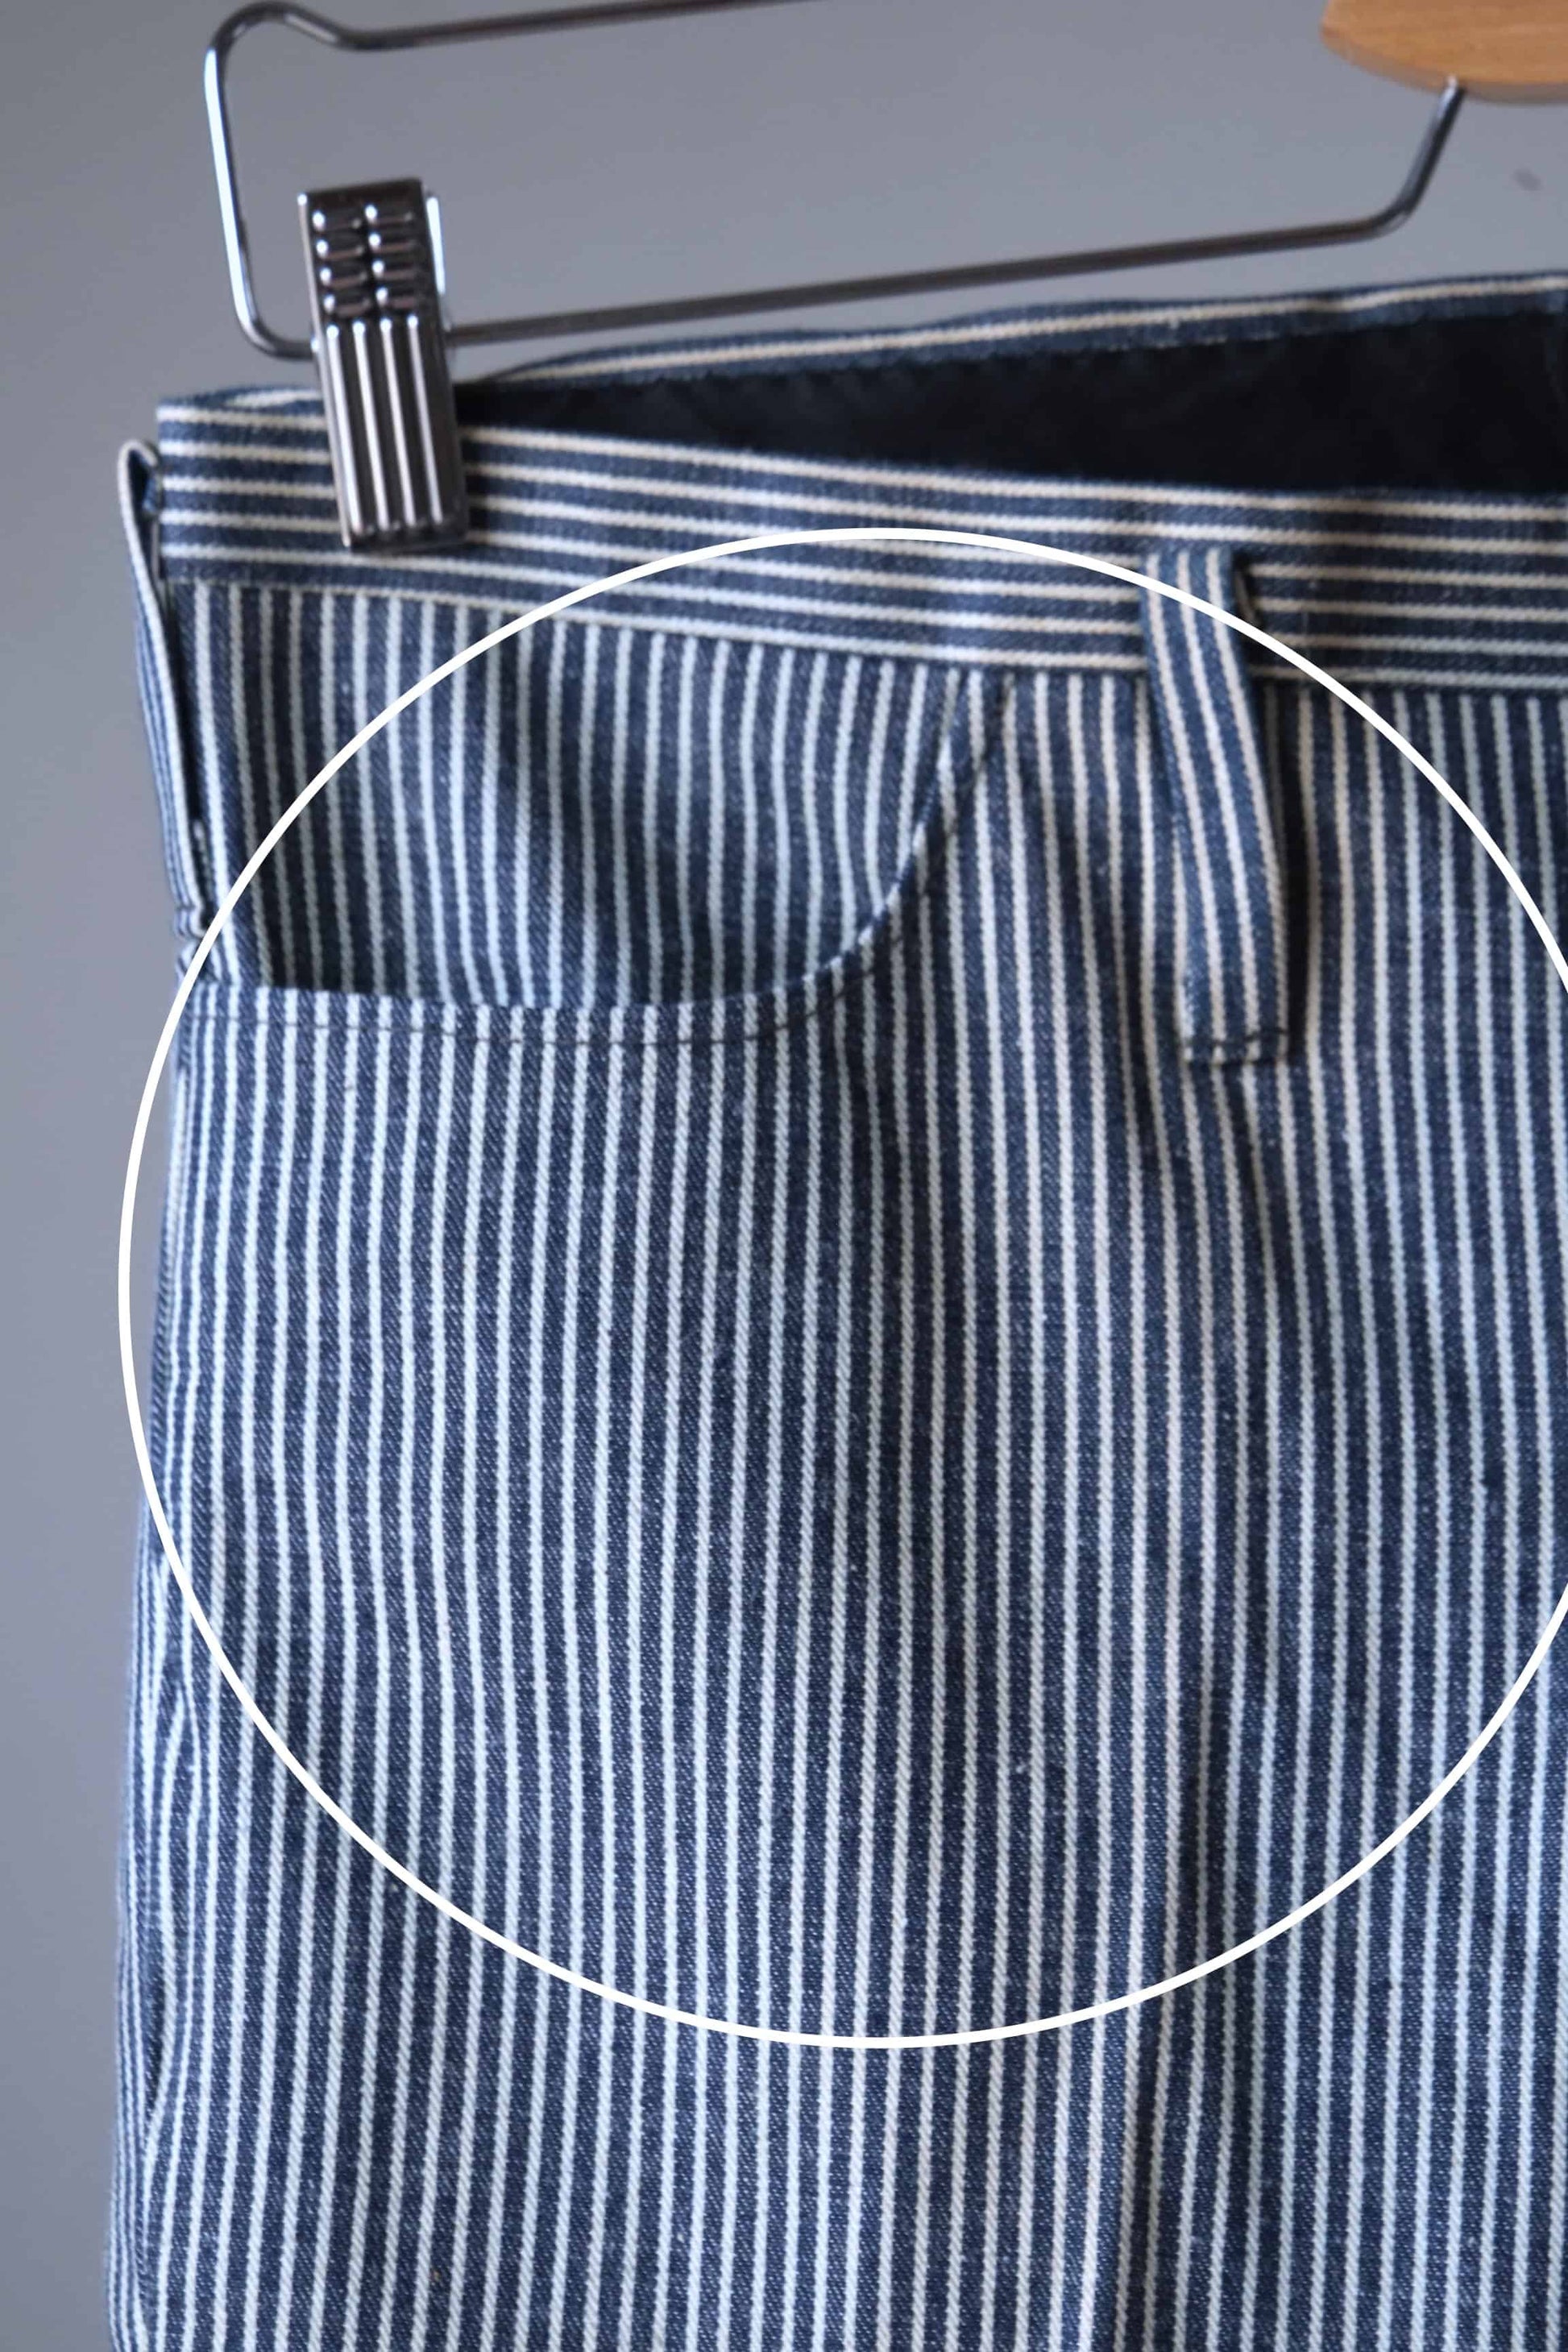 Close view of LEE 60's Vintage Tapered Slim Pants black and white stripes, with circle showing a stain